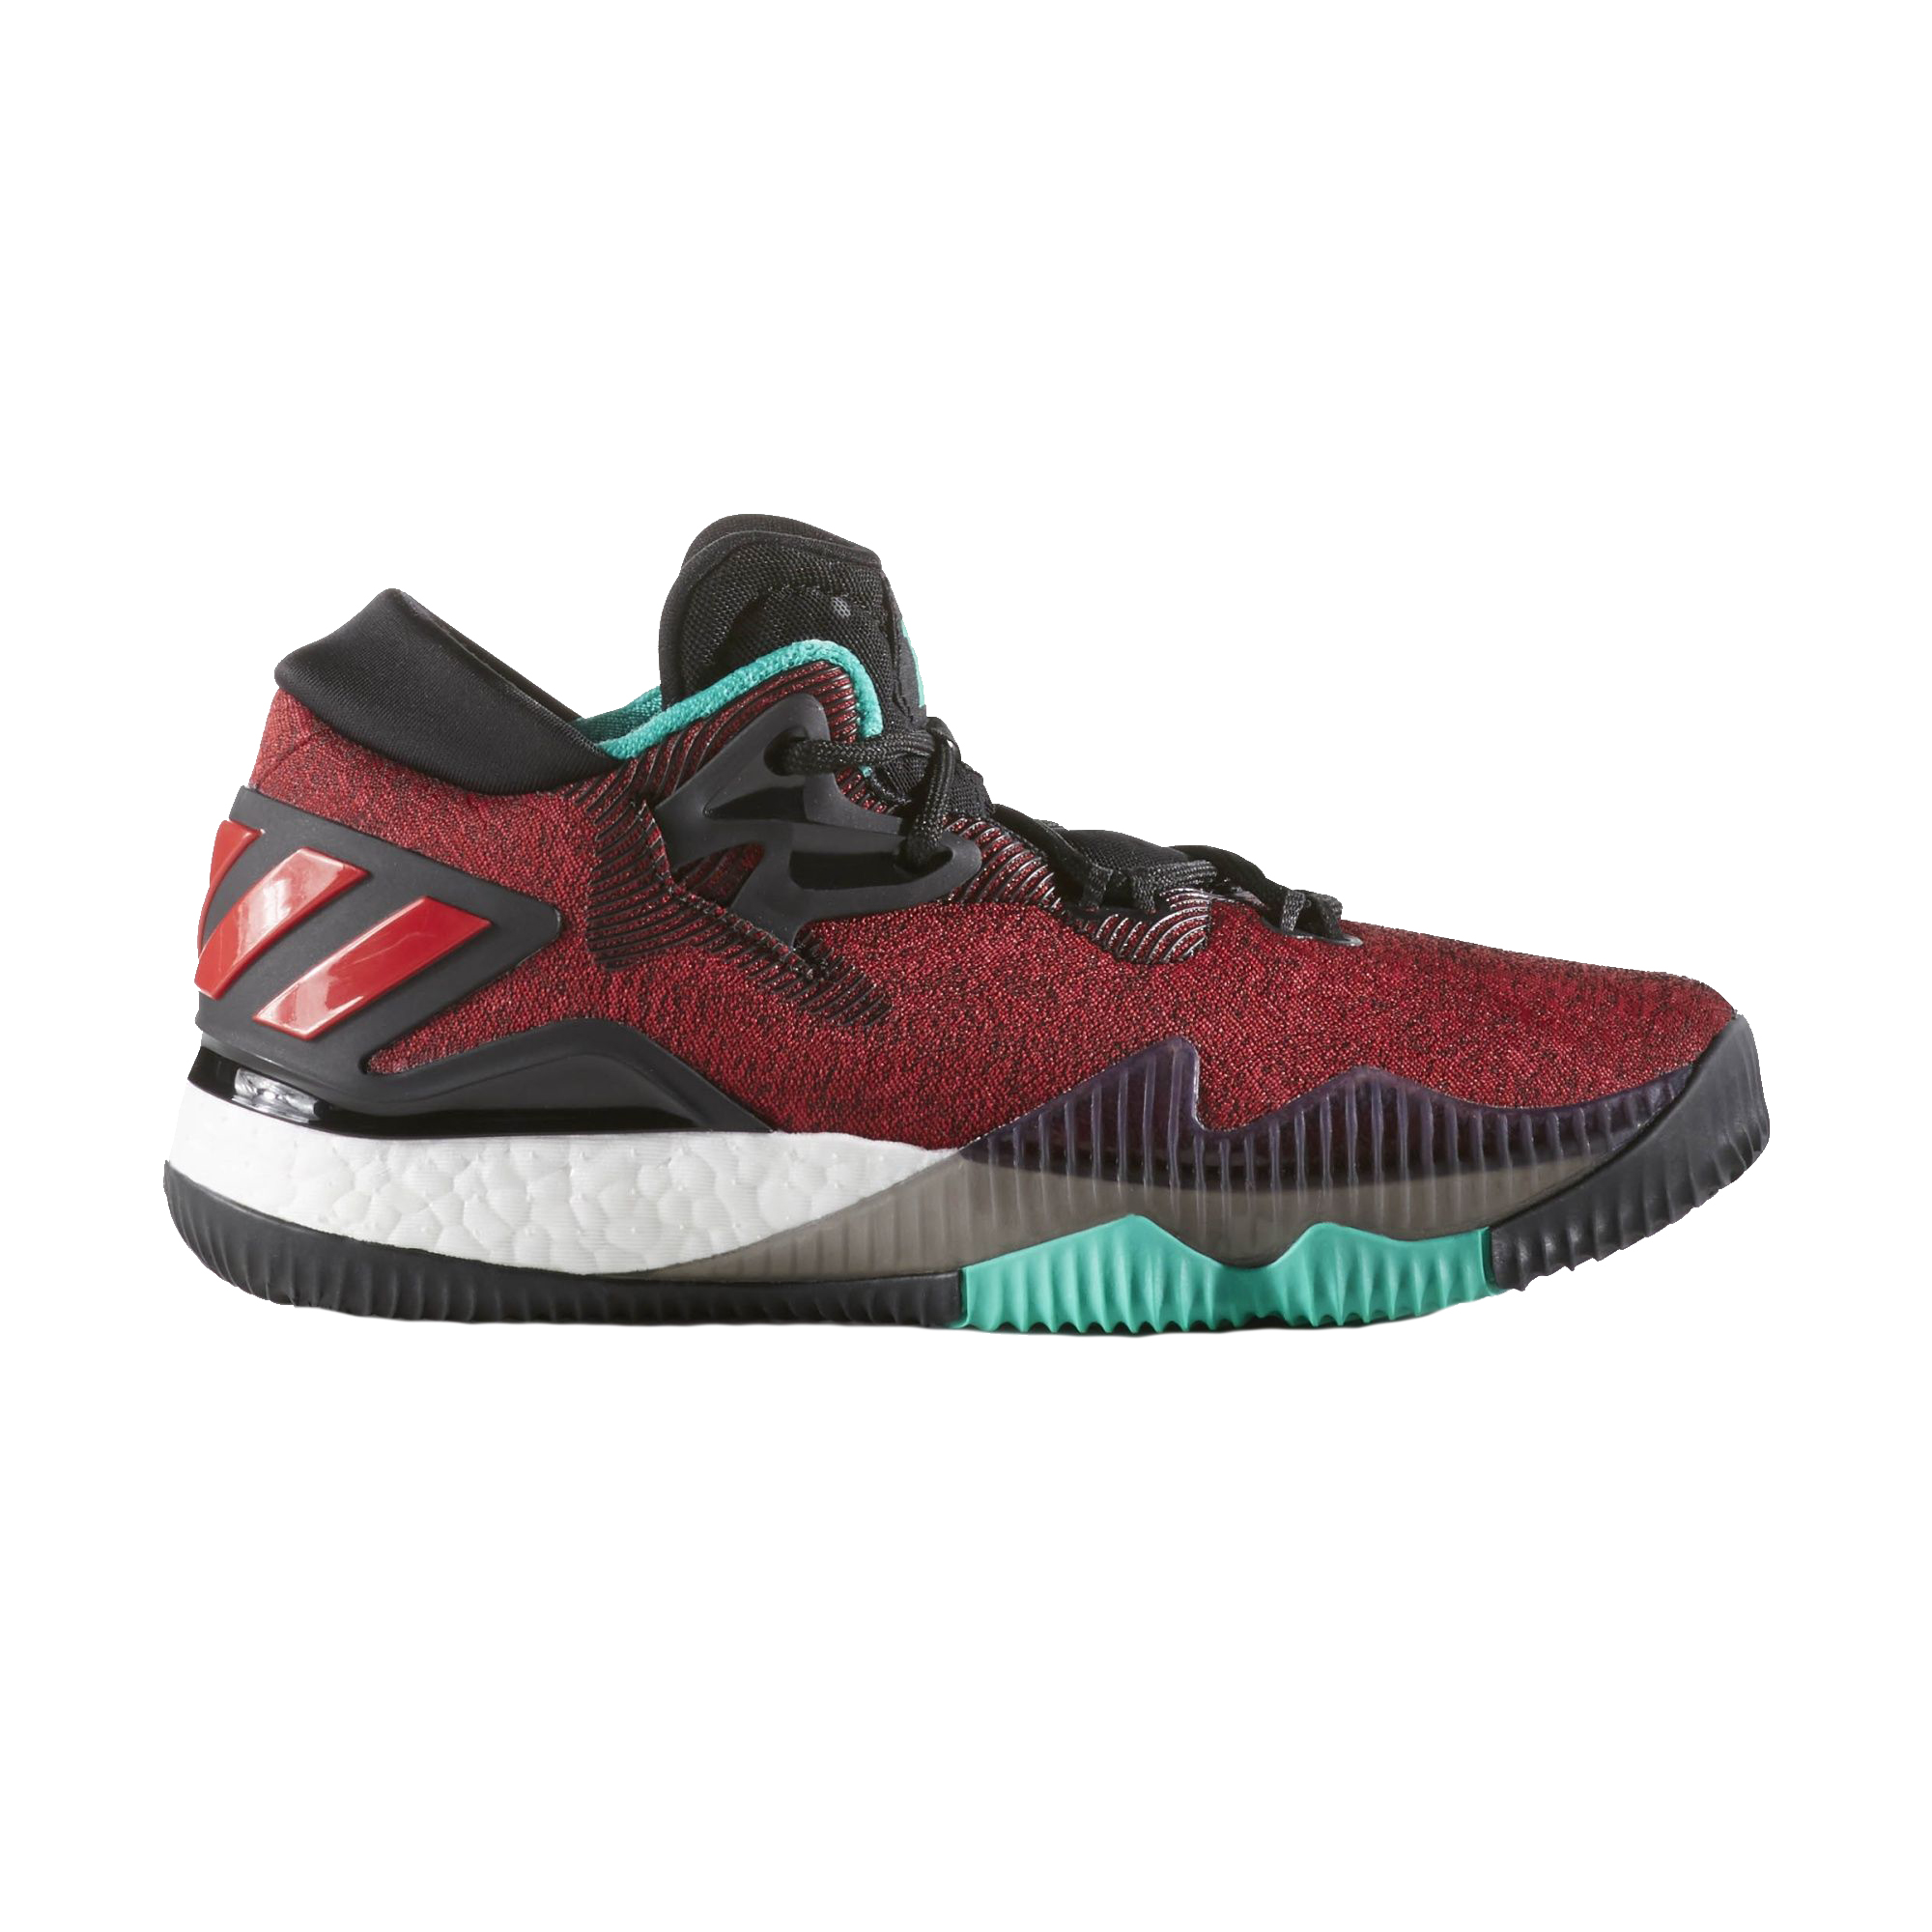 Adidas Crazylight Boost Low 2016 J "Little Red